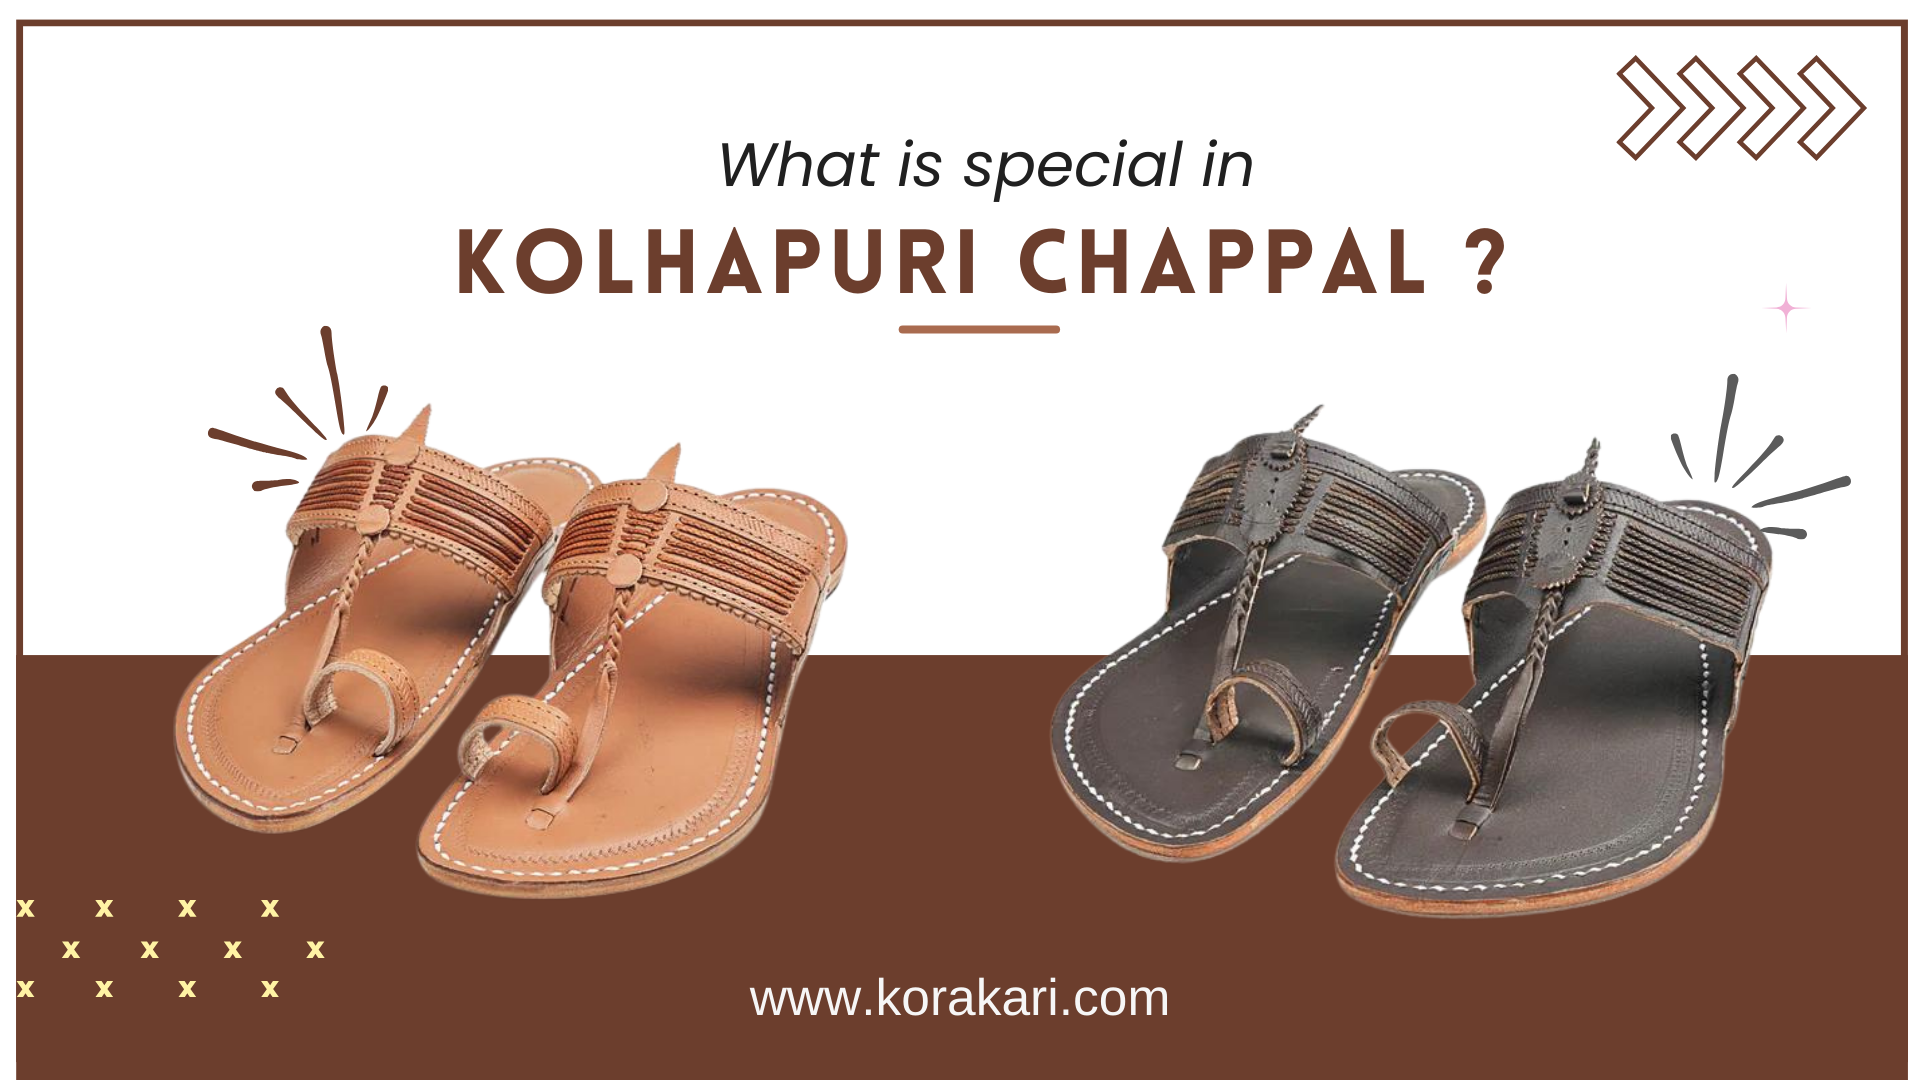 What is special in Kolhapuri chappal?